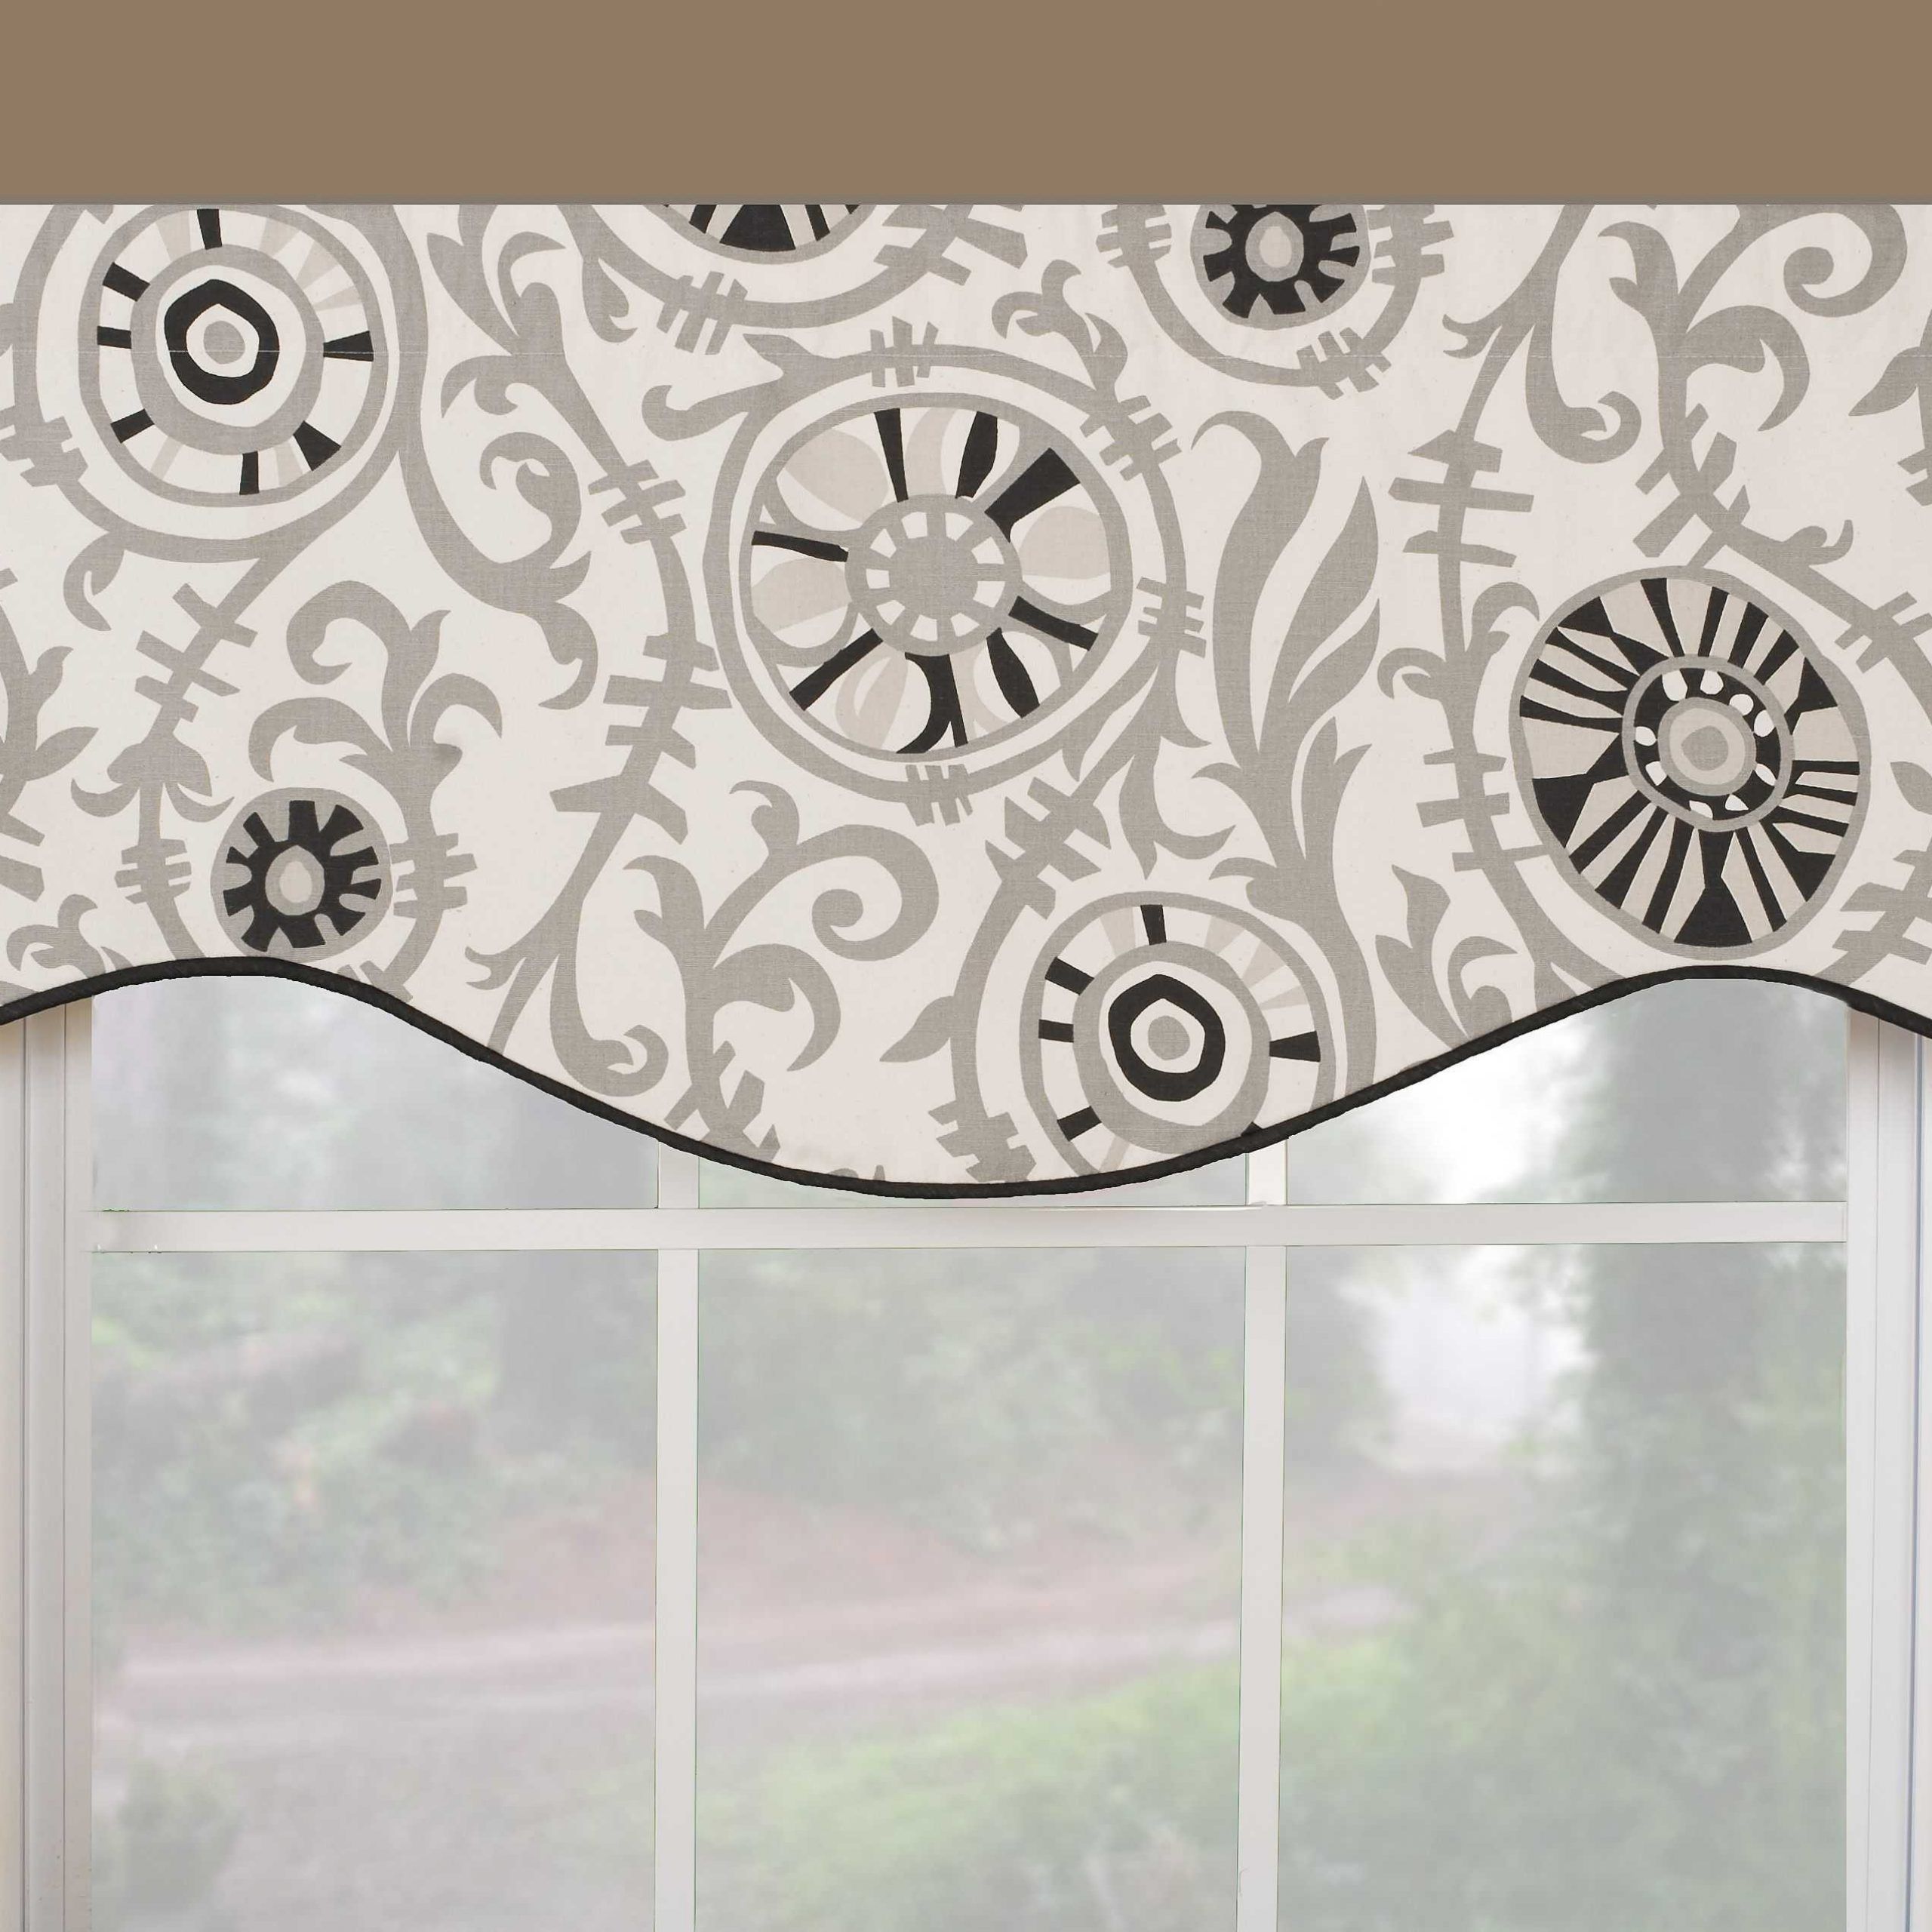 Fascinating Window Valance White Knit Lace Bird Motif Pertaining To White Knit Lace Bird Motif Window Curtain Tiers (View 9 of 20)